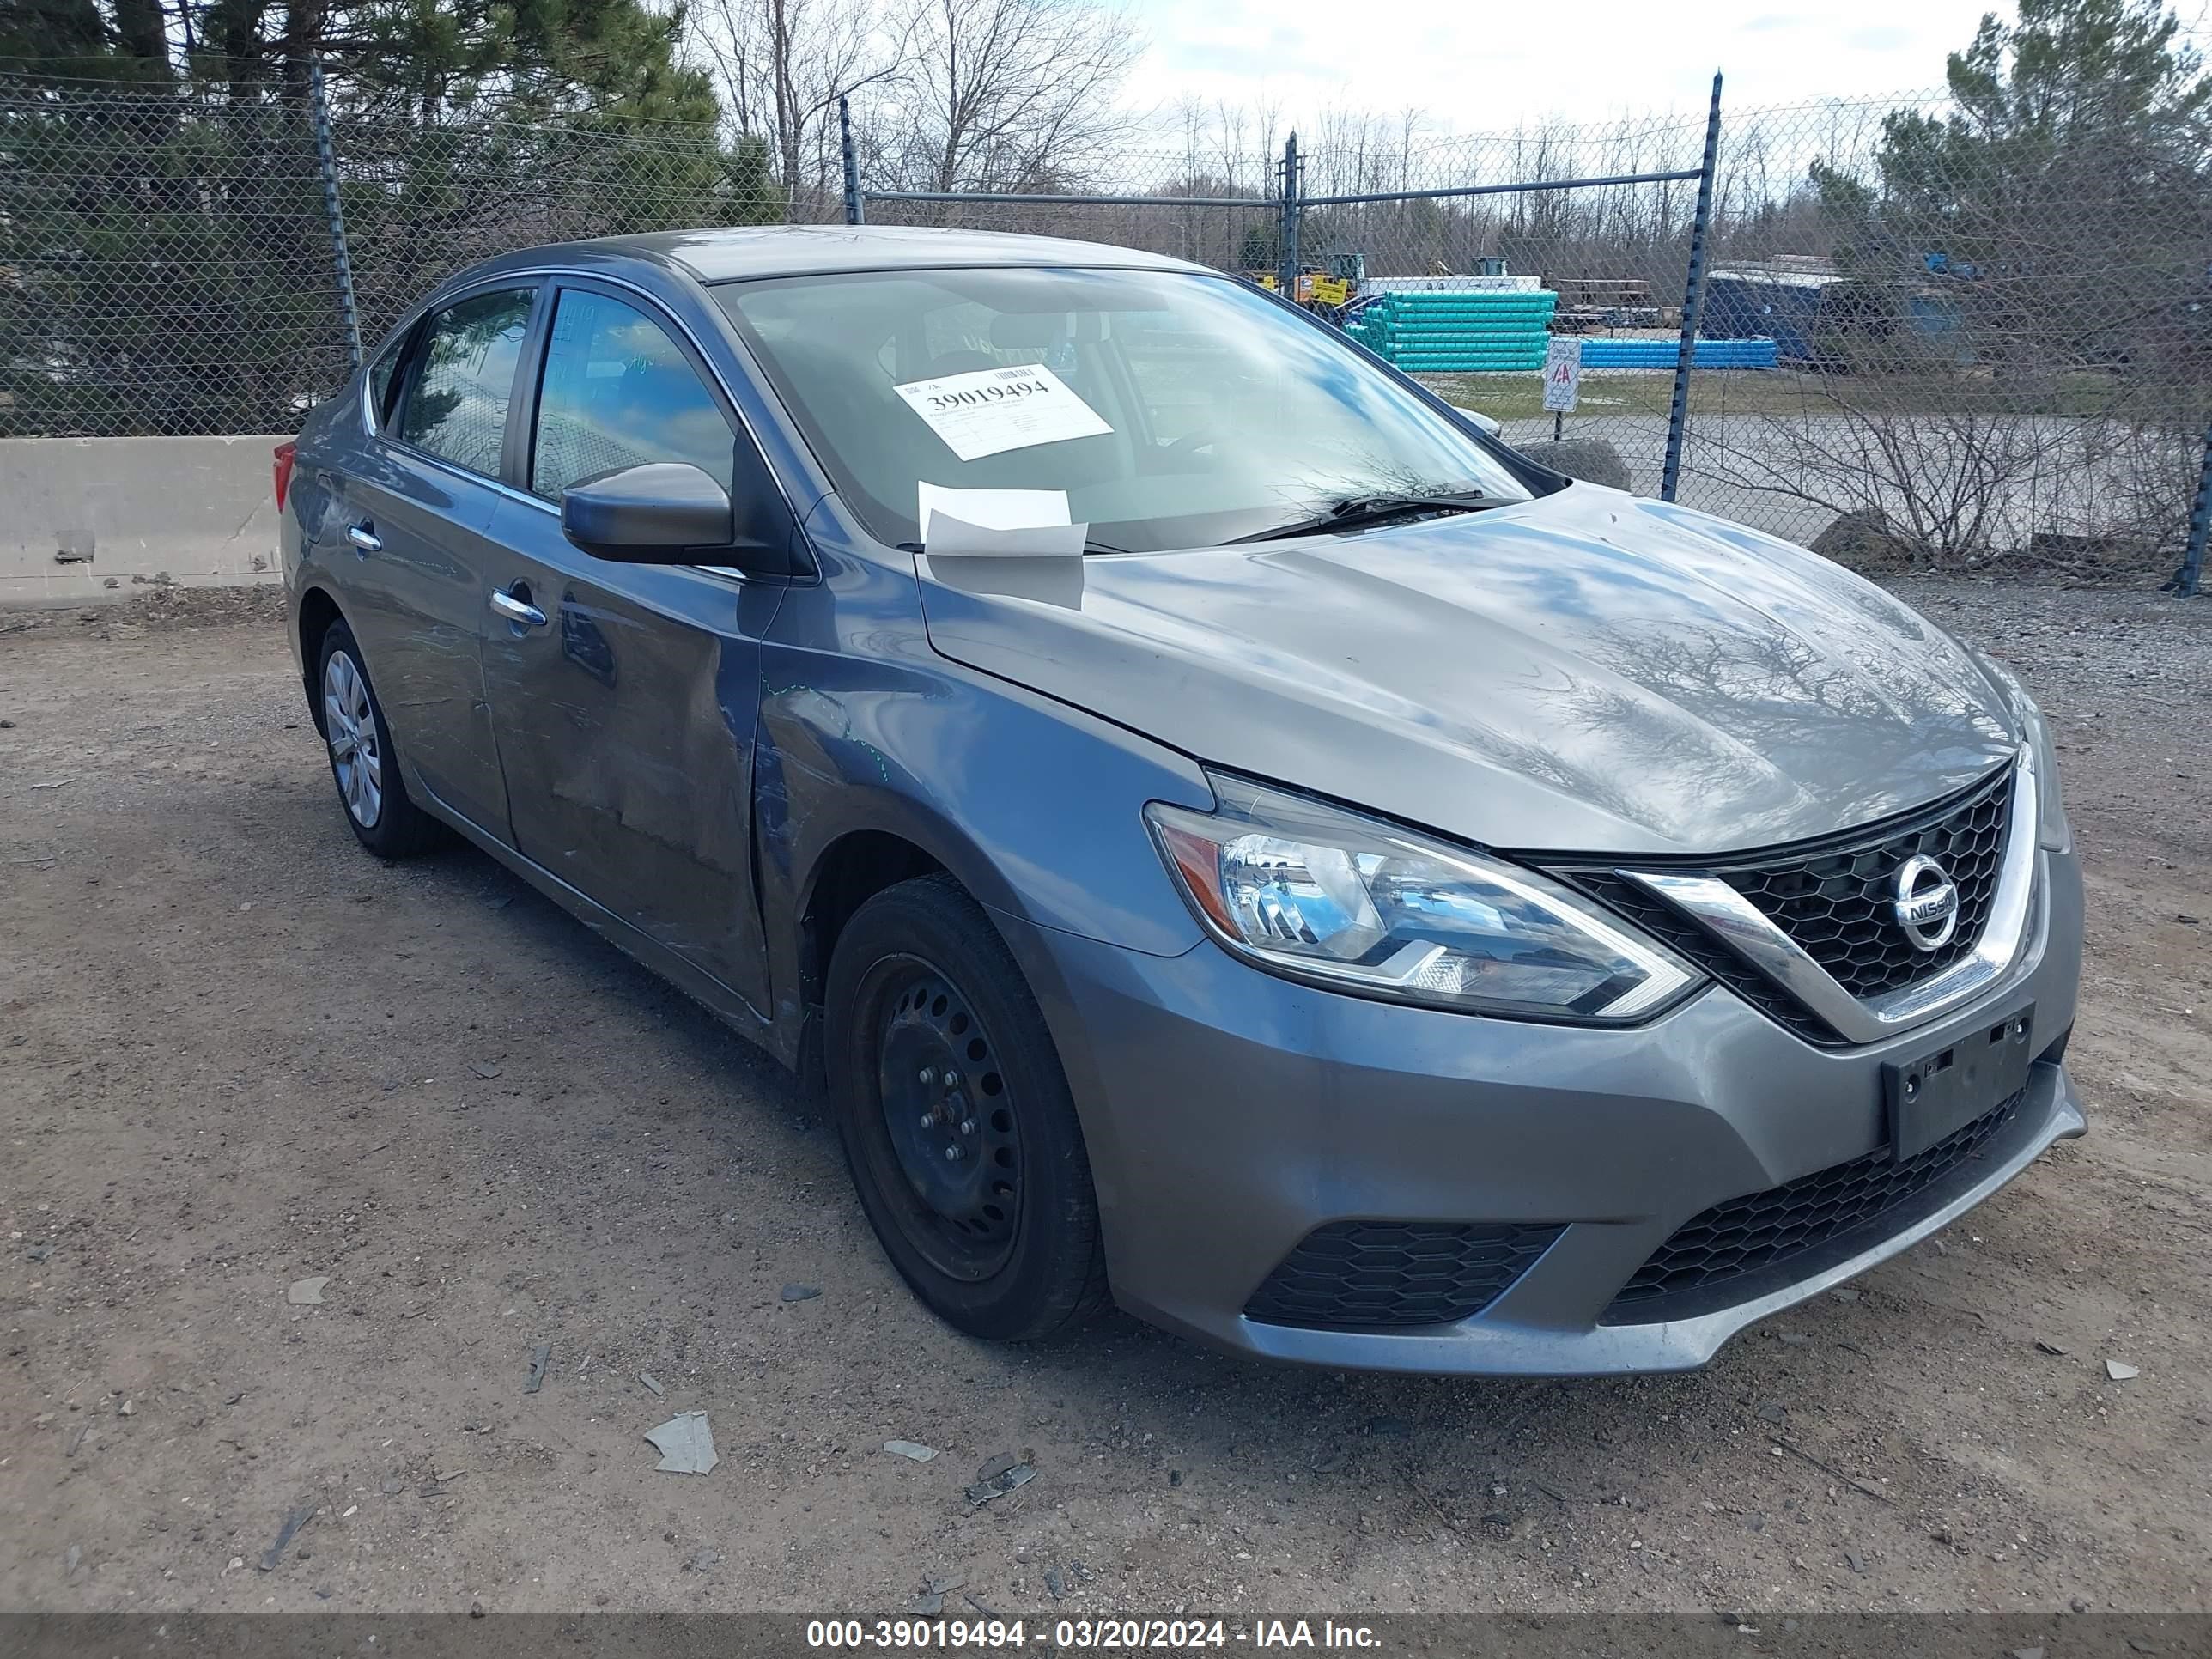 vin: 3N1AB7AP3HY303930 3N1AB7AP3HY303930 2017 nissan sentra 1800 for Sale in 53089, N70 W25277 Indian Grass Lane, Sussex, Wisconsin, USA